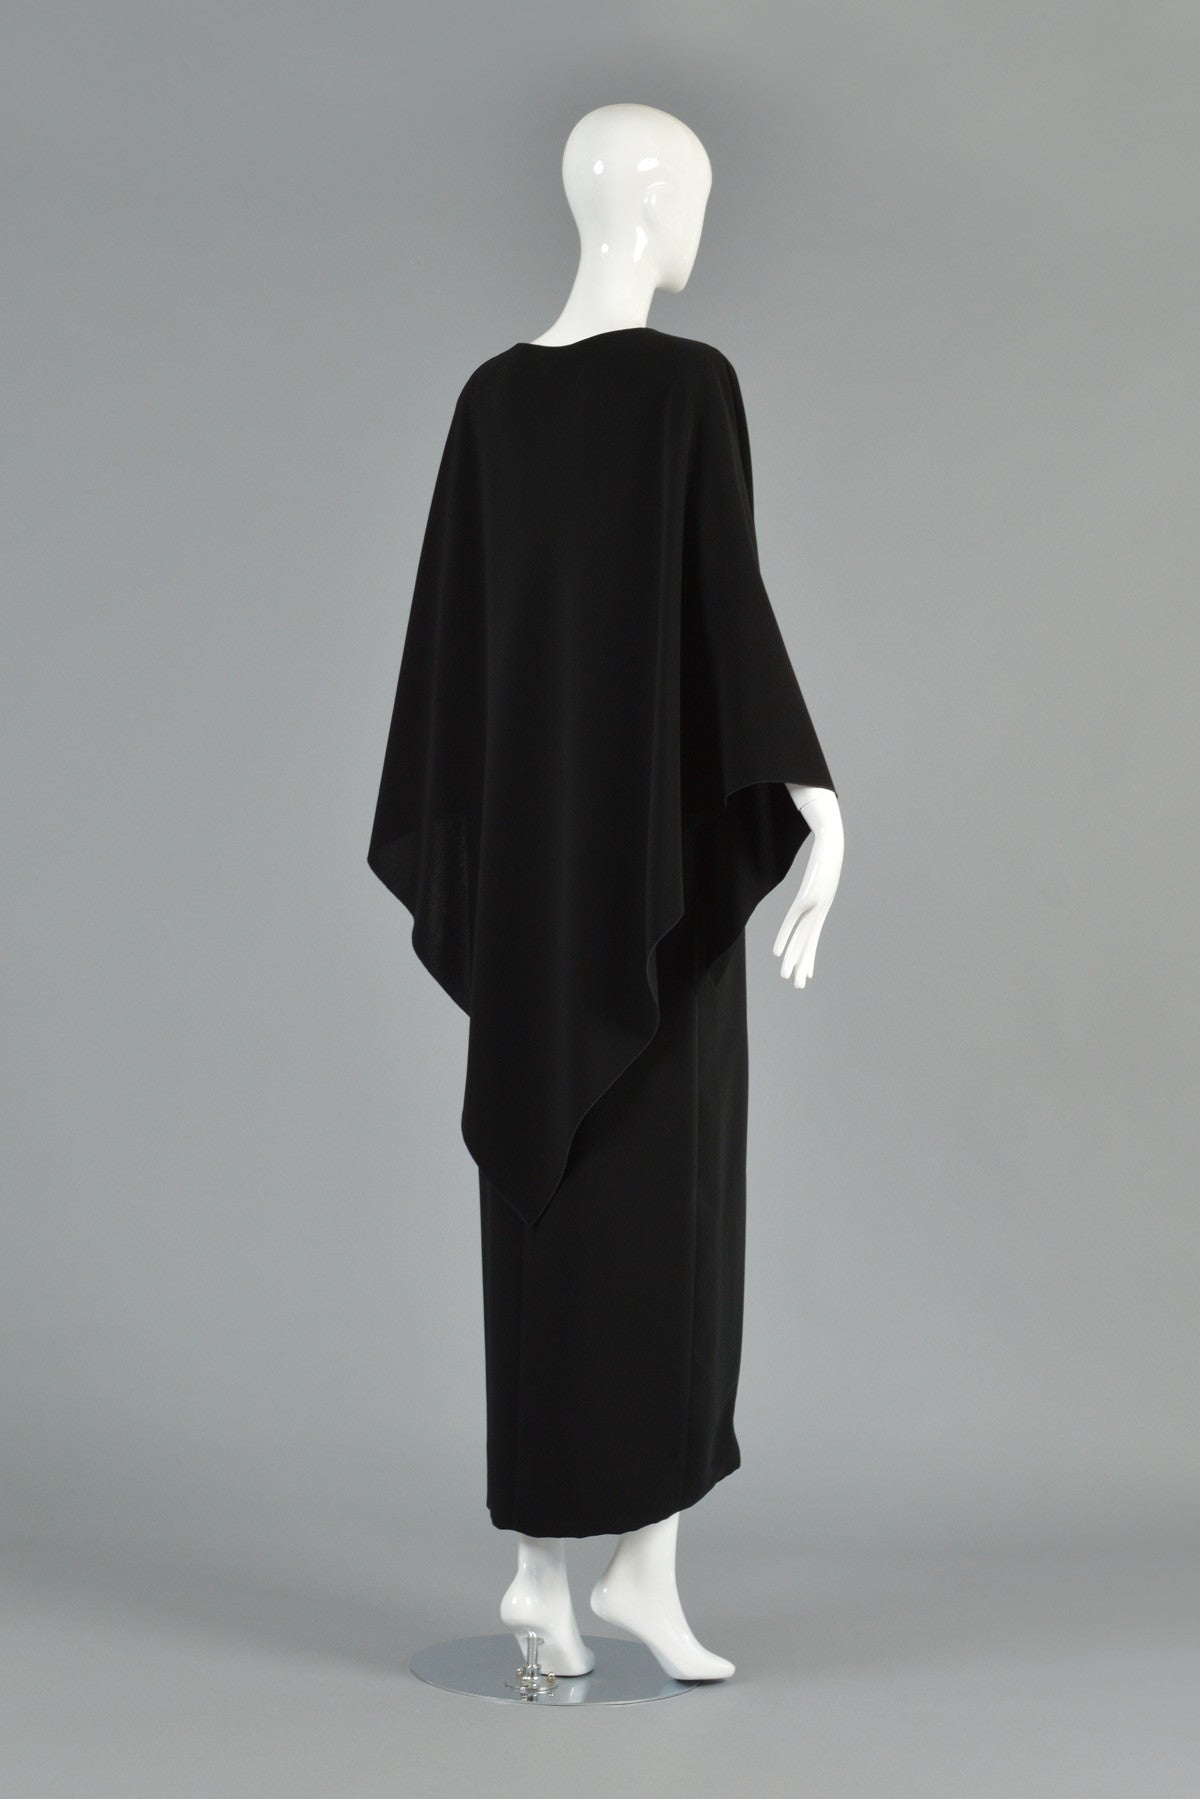 Pierre Cardin 1978 Cape Backed Evening Gown | BUSTOWN MODERN